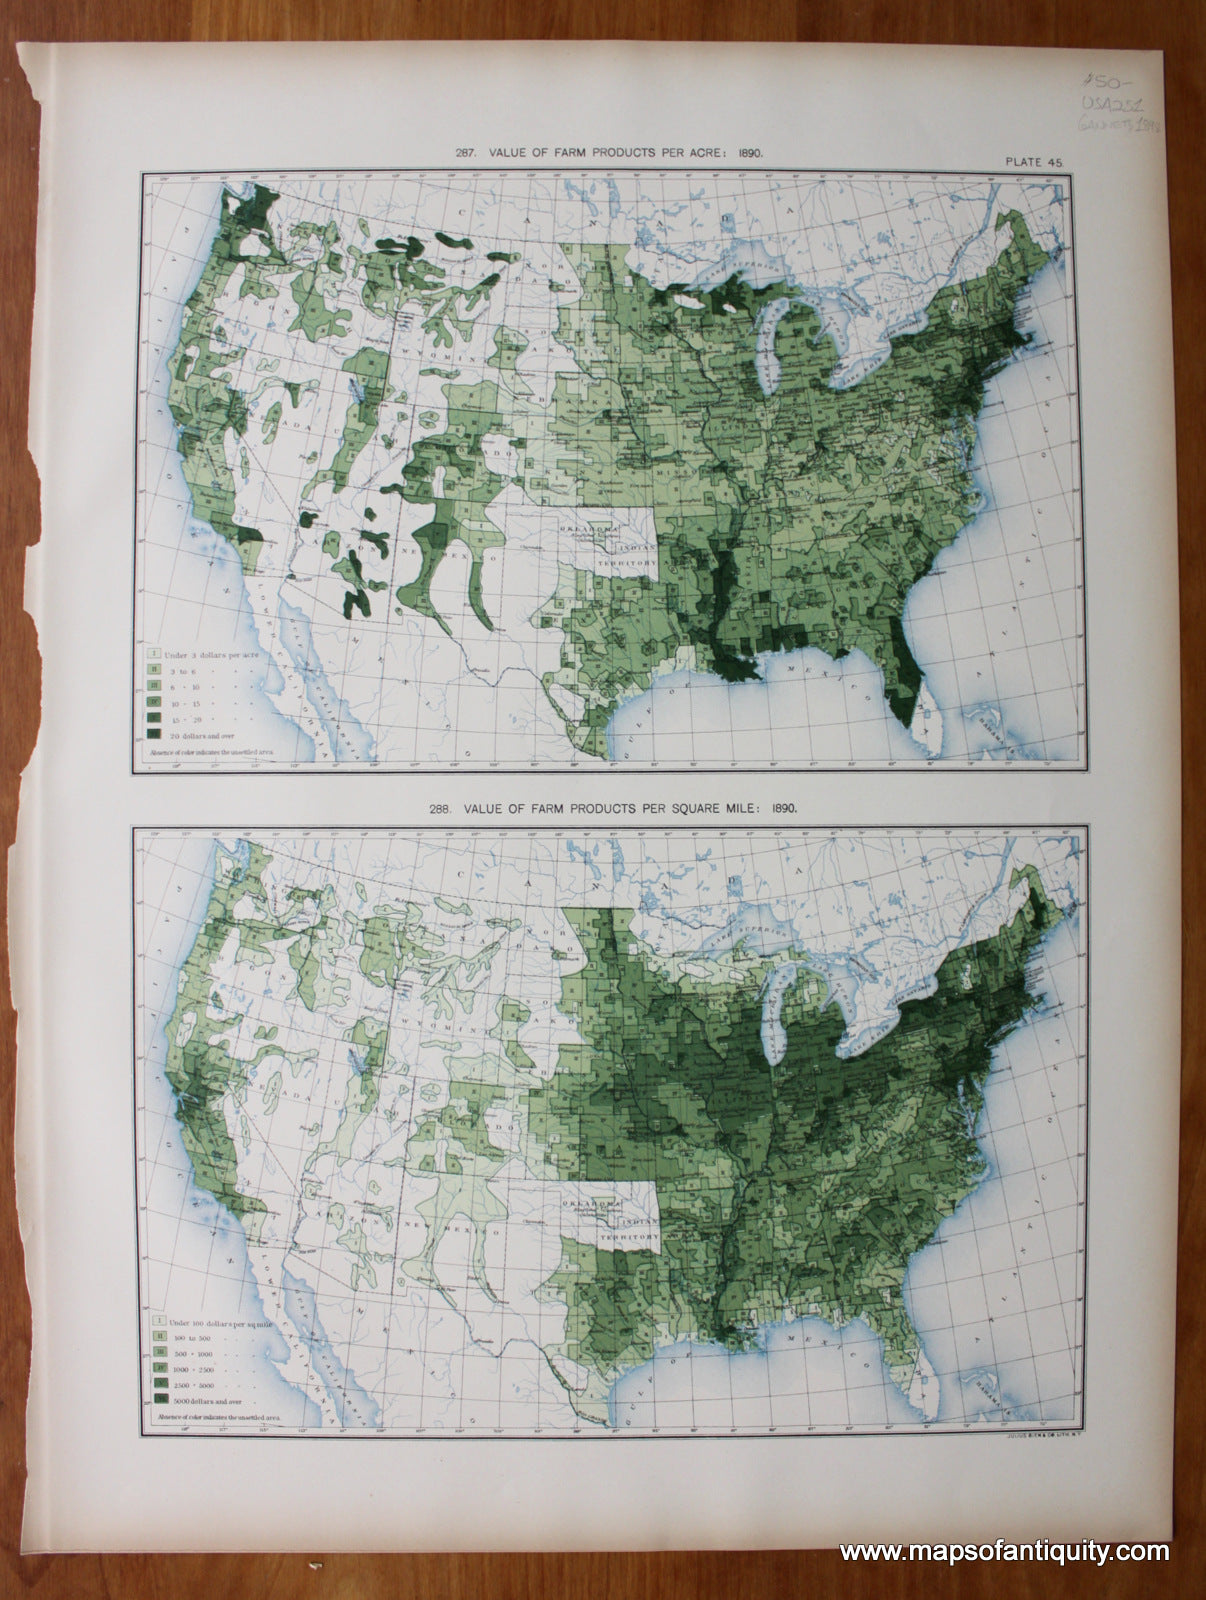 Antique-Printed-Color-Map-Value-of-Farm-Products-Per-Acre:-1890/-Value-of-Farm-Products-Per-Square-Mile:-1890-United-States-United-States-General-1898-Gannett-Maps-Of-Antiquity